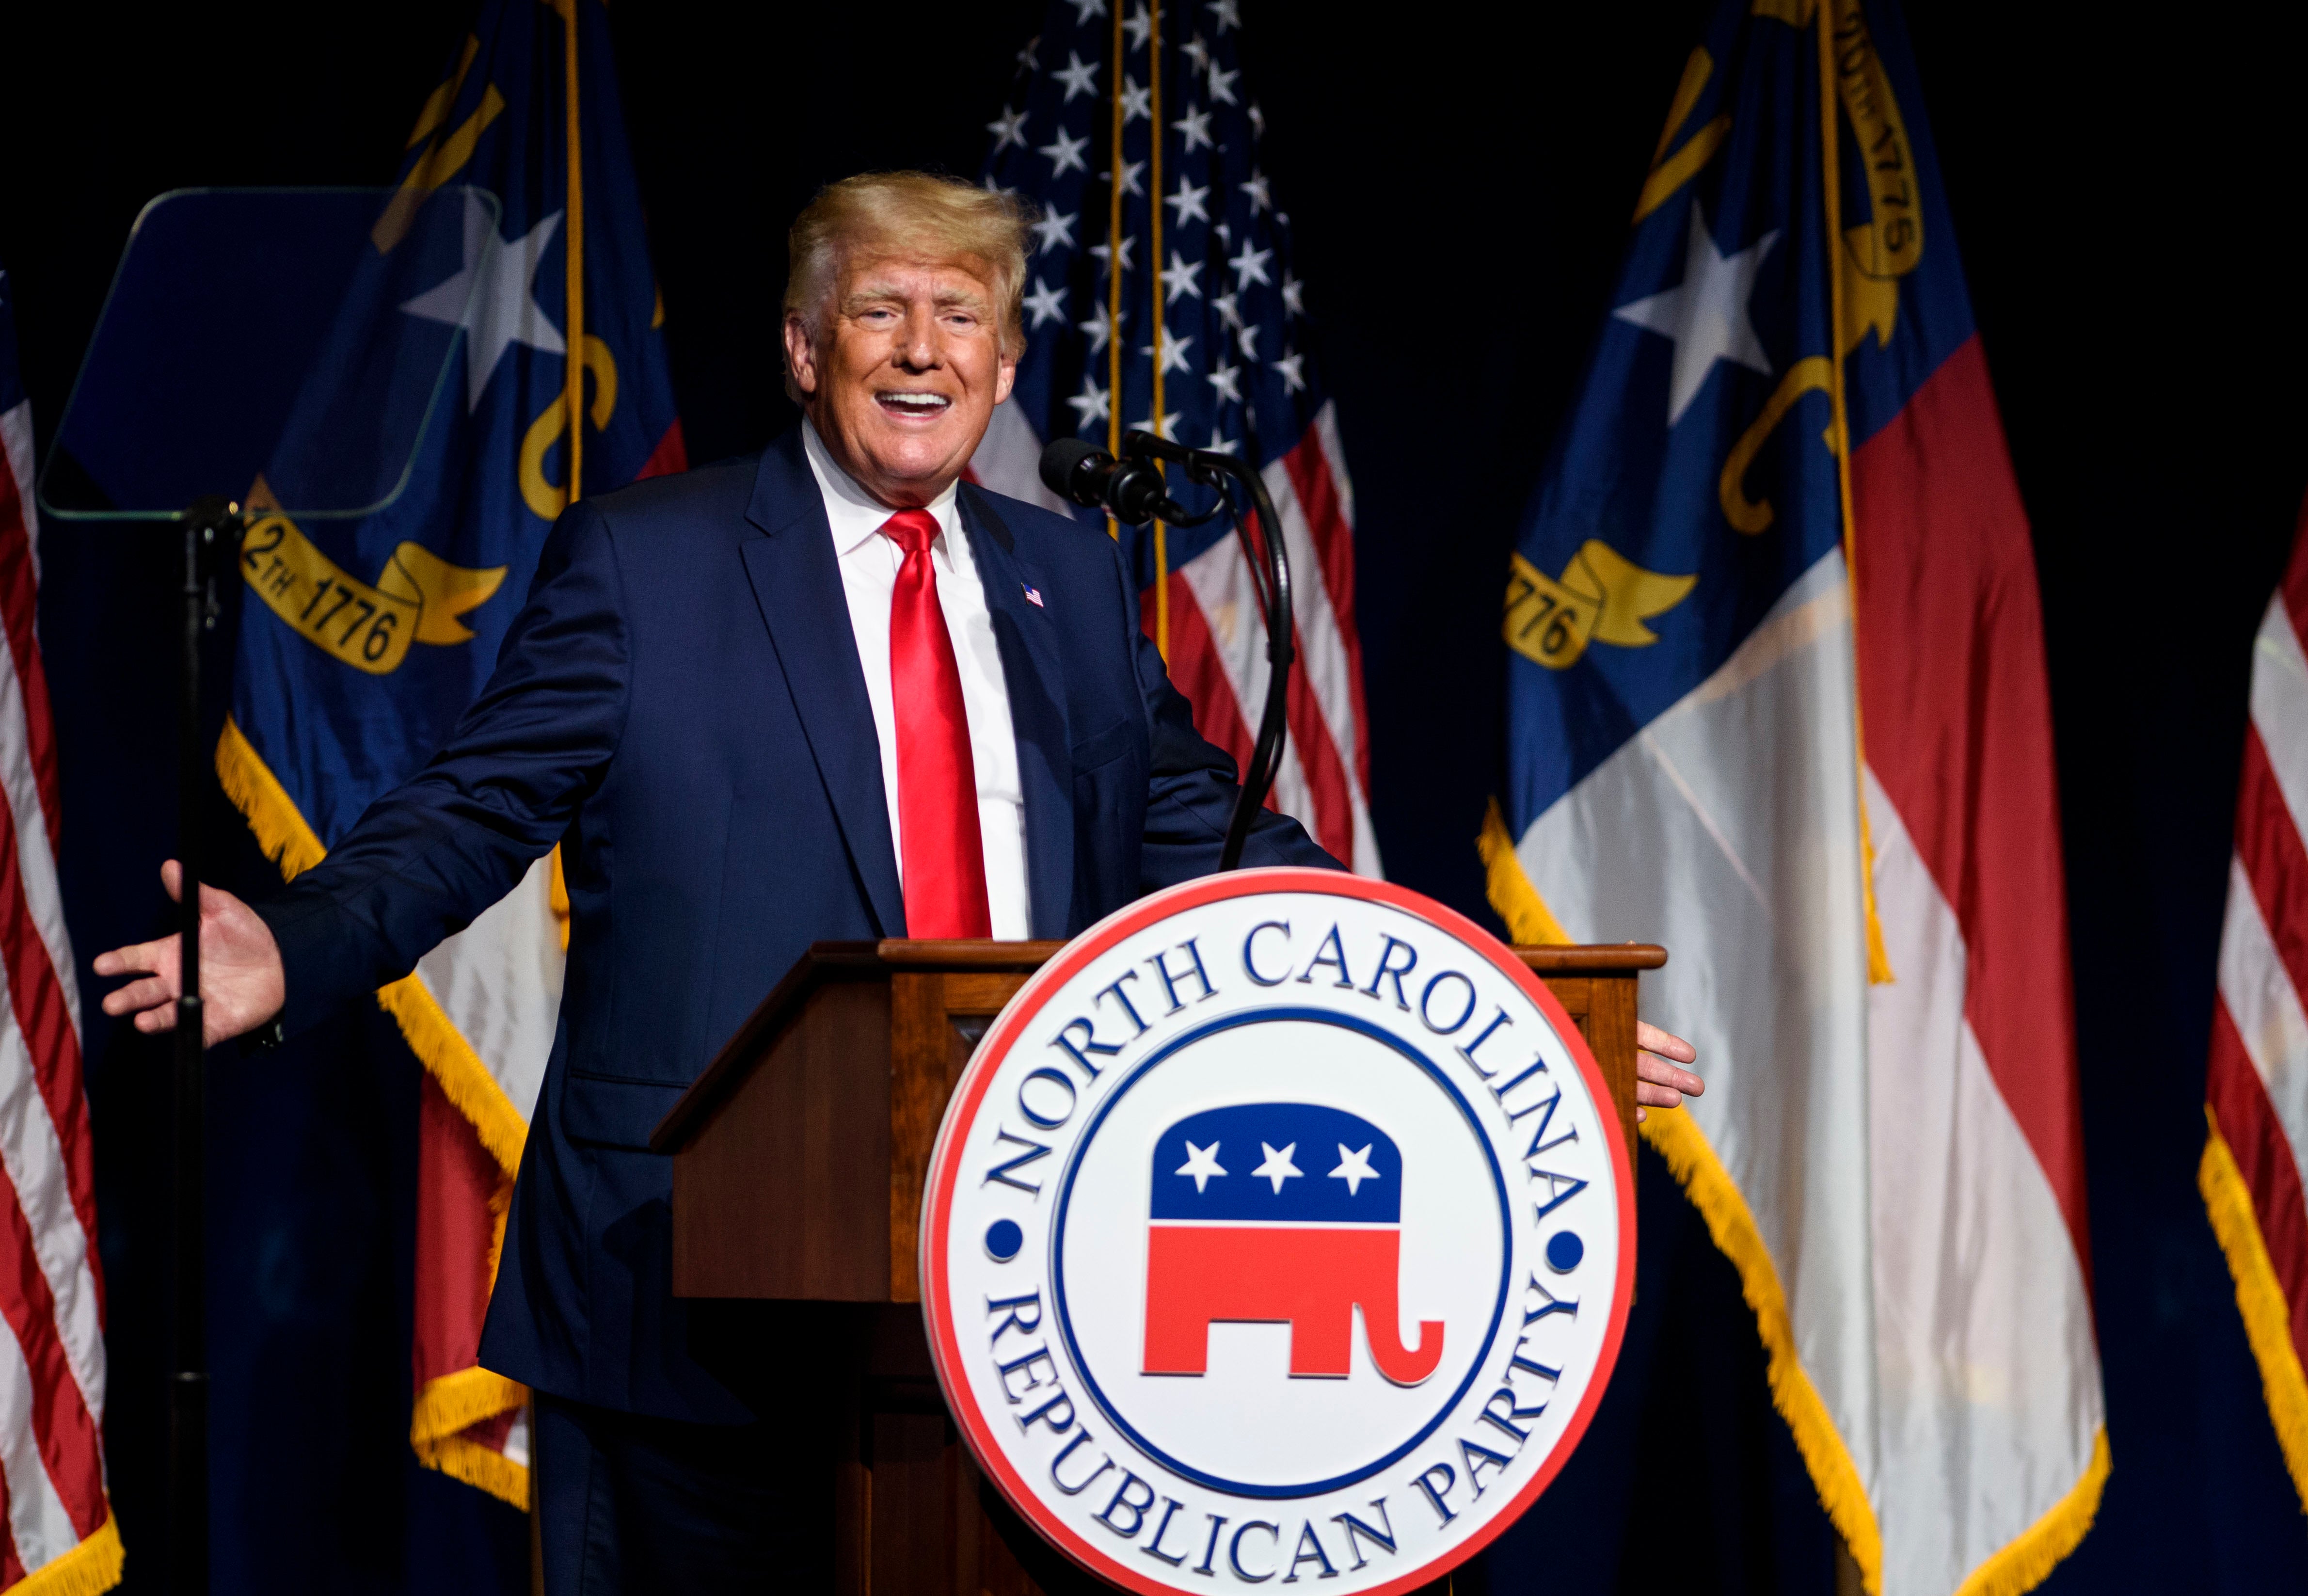 Former US President Donald Trump addresses the NCGOP state convention on June 5, 2021 in Greenville, North Carolina. The ex-president has claimed his endorsement ‘means more’ than anyone else’s ‘ever’.